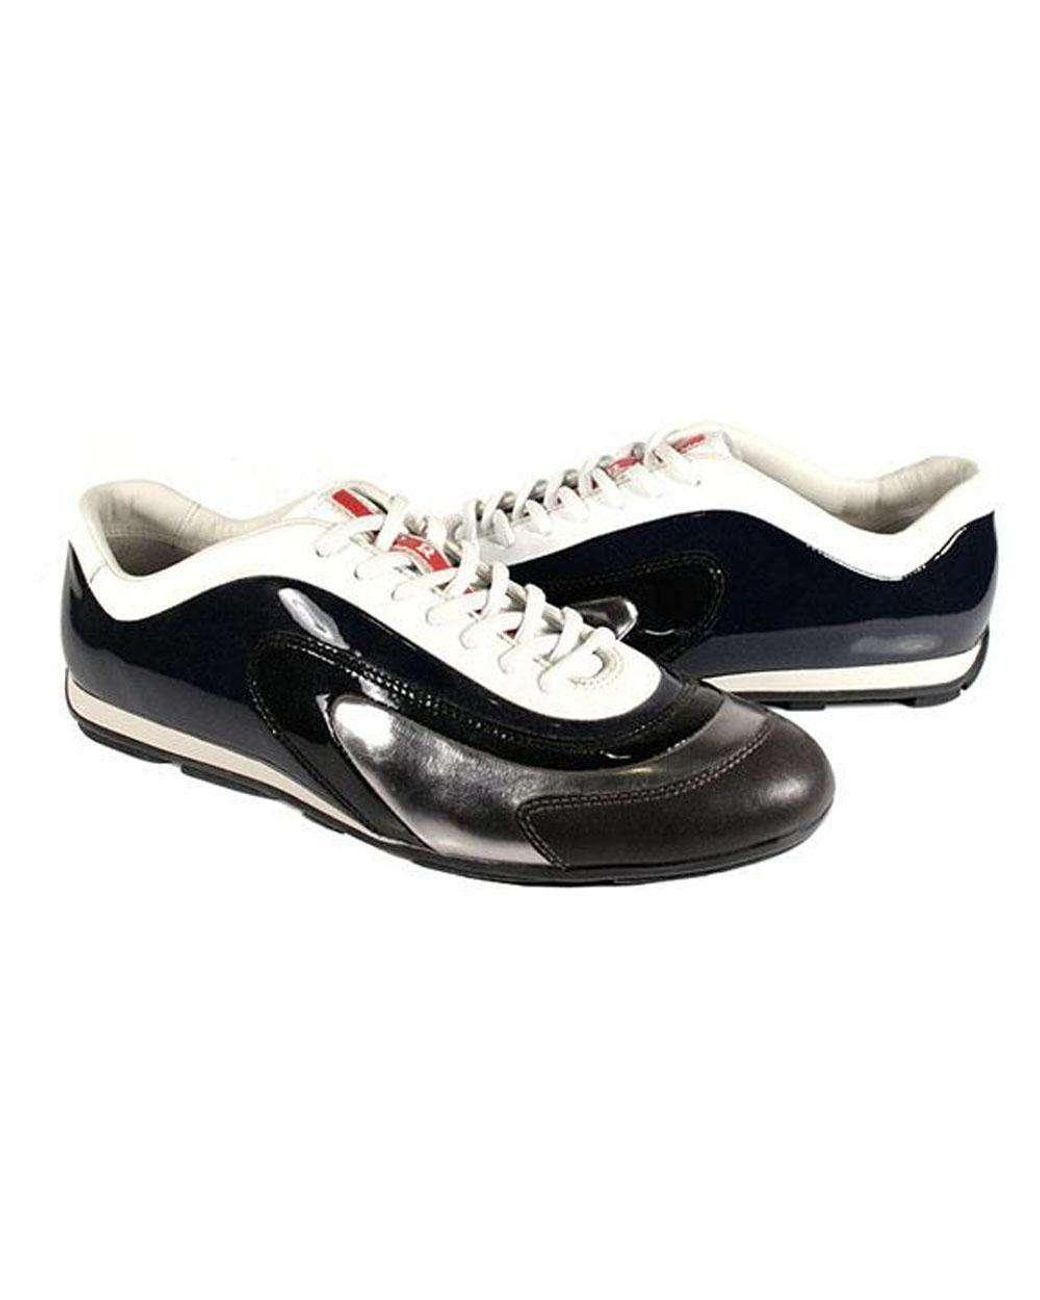 Prada Sports Designer Shoes White Silver And Navy Sneakers 4e1890 (prm34)  in Black for Men | Lyst UK